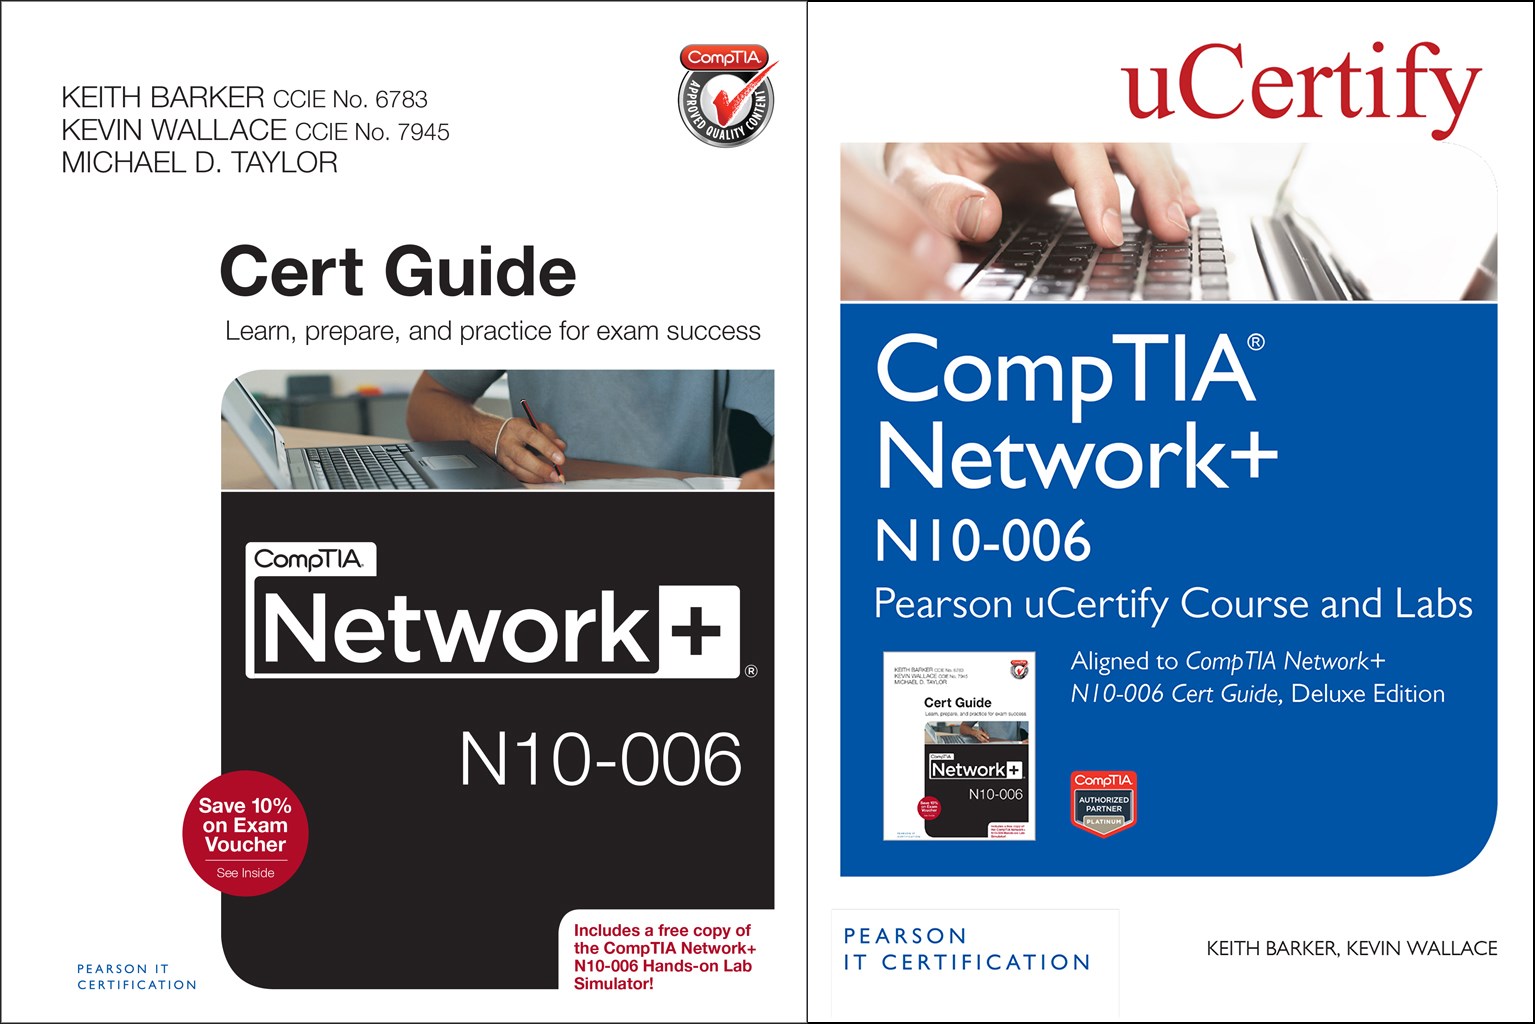 CompTIA Network+ N10-006 Pearson uCertify Course and Labs and Textbook Bundle